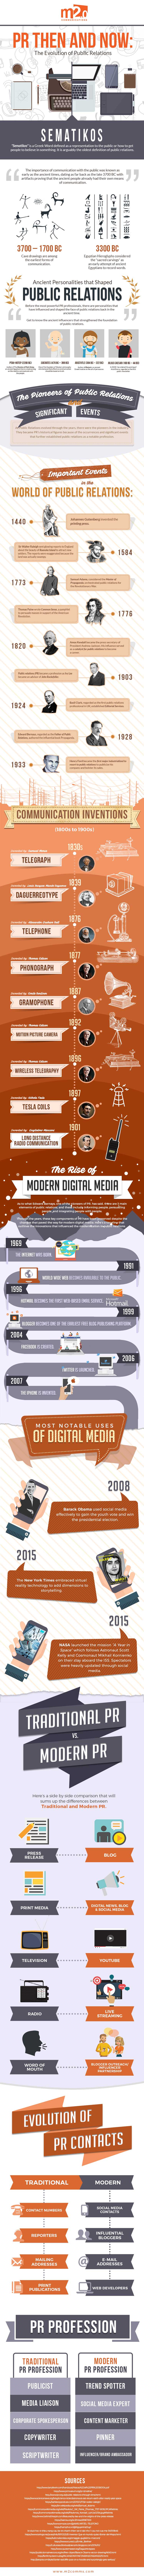 PR Then and Now: The Evolution of Public Relations